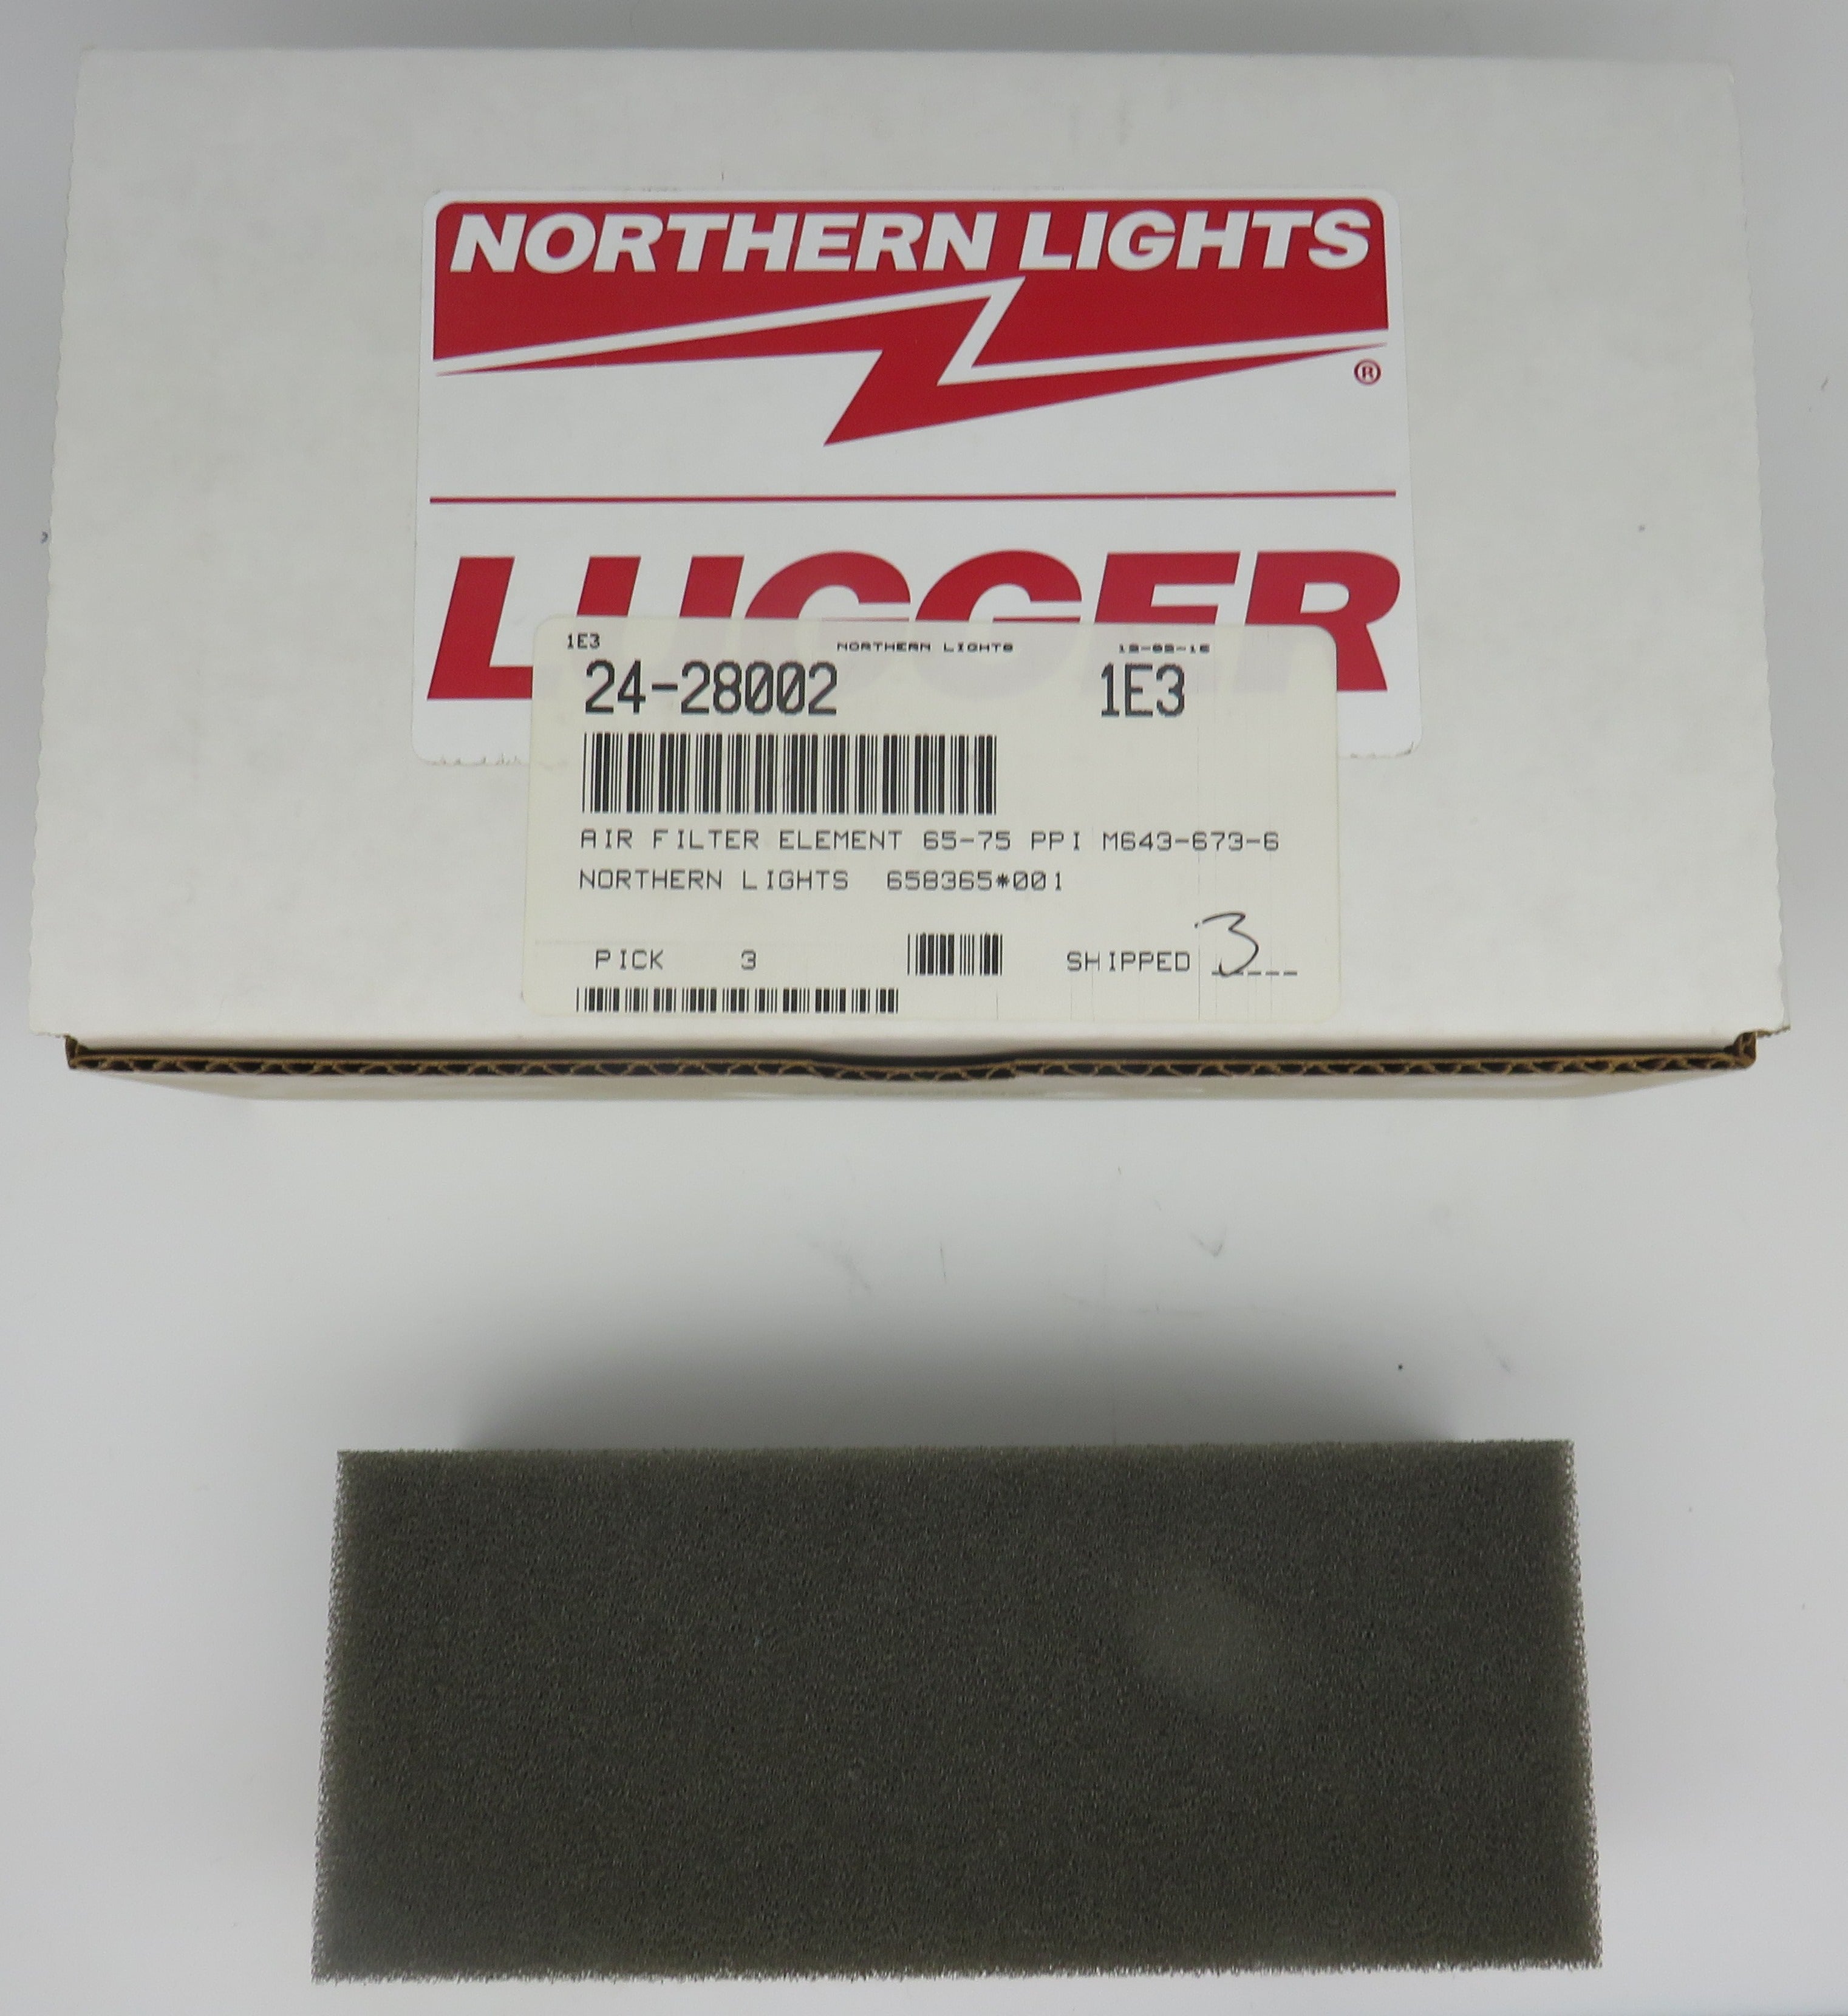 24-28002 Northern Lights Lugger Air Filter Element Generator (Replaces 24-28300)